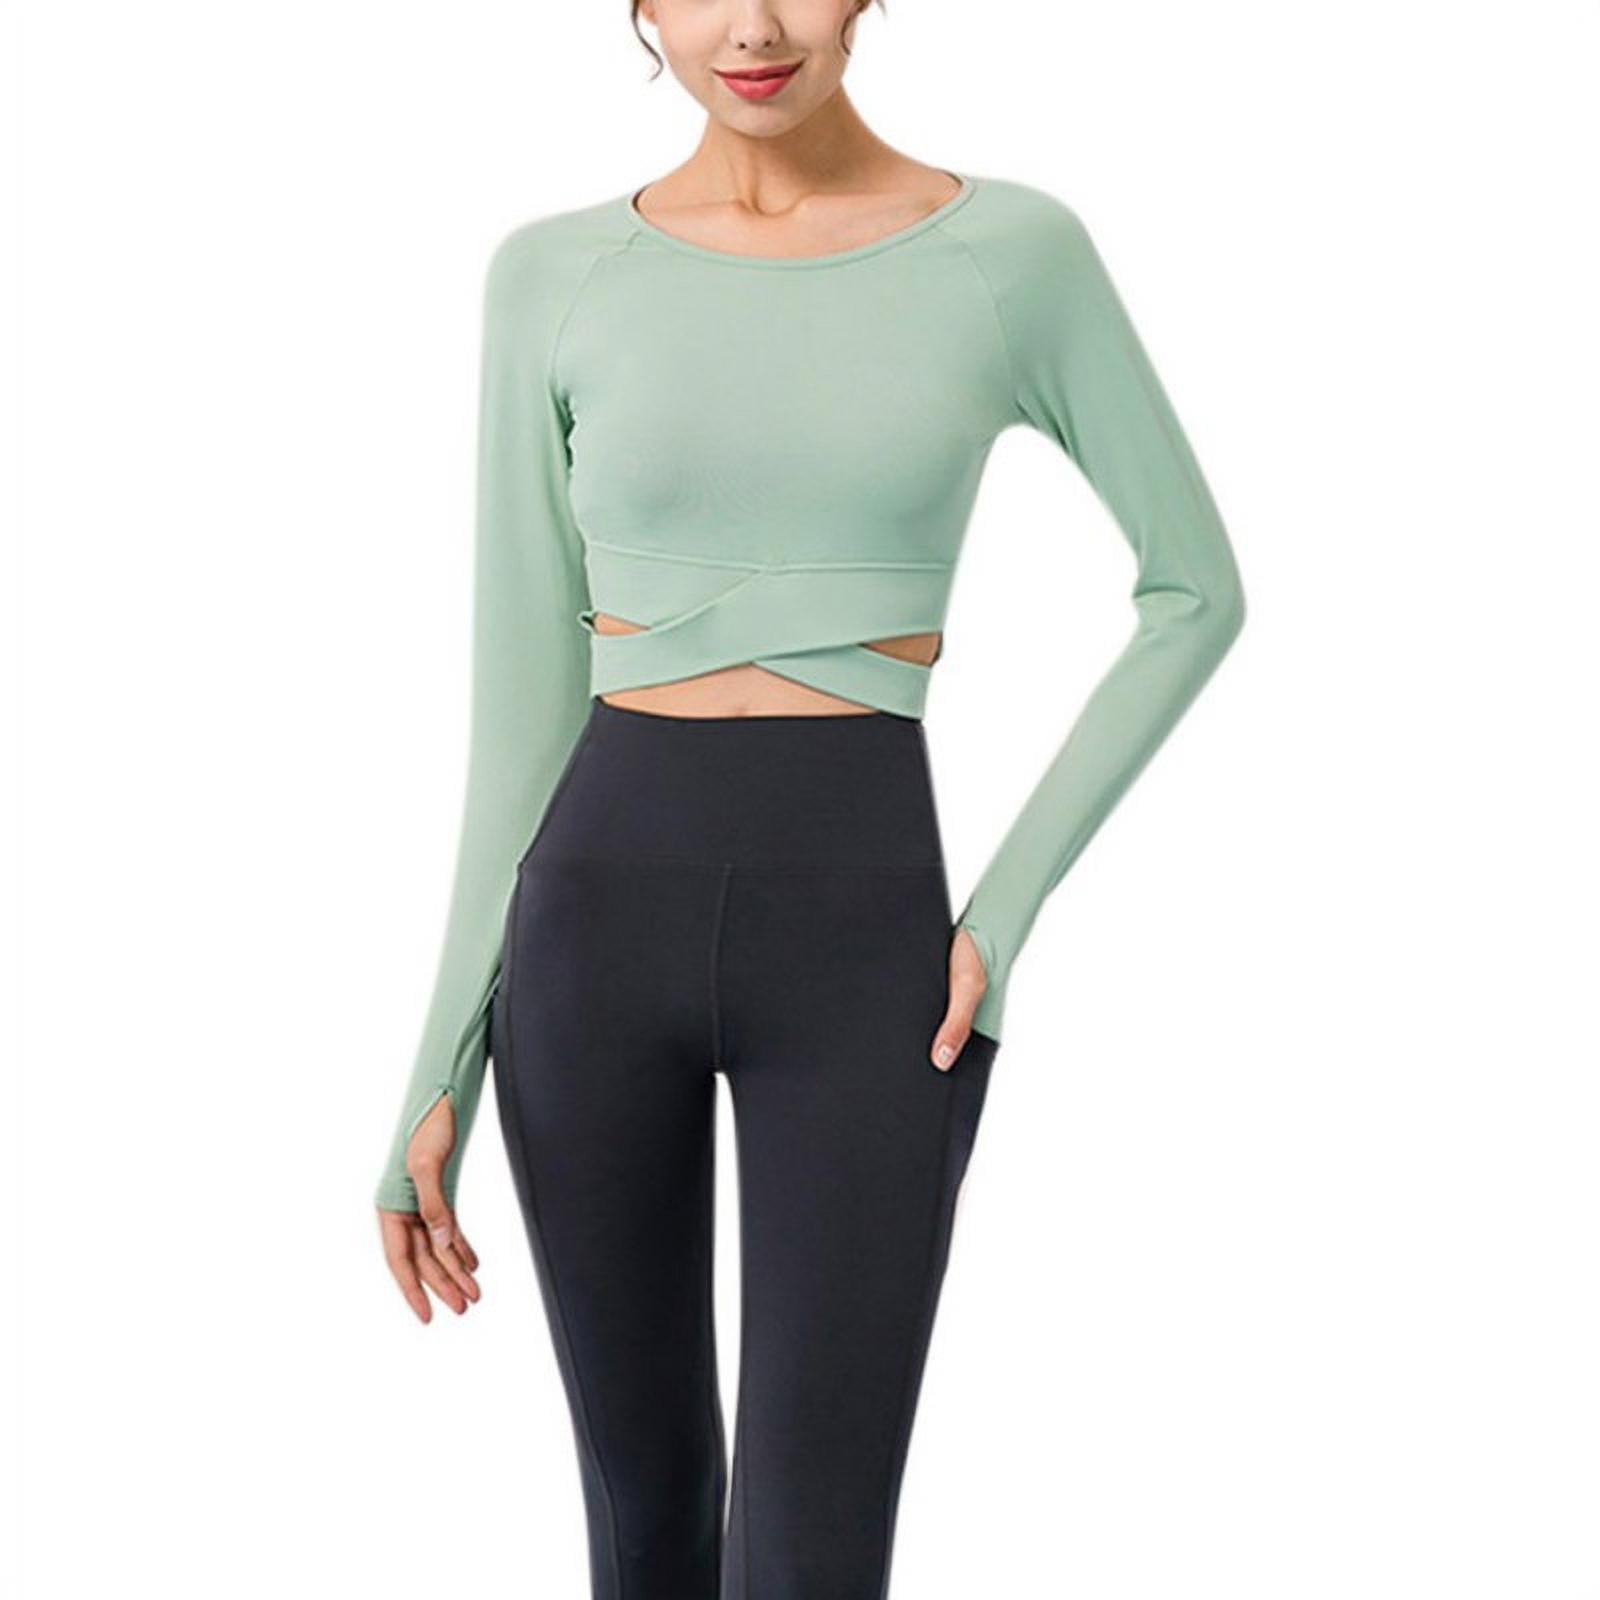 Womens Slim Fitted Long Sleeve Workout Shirts Womens Yoga Long Sleeve Crop  Top Athletic Yoga Sport T Shirt From Virson, $13.53